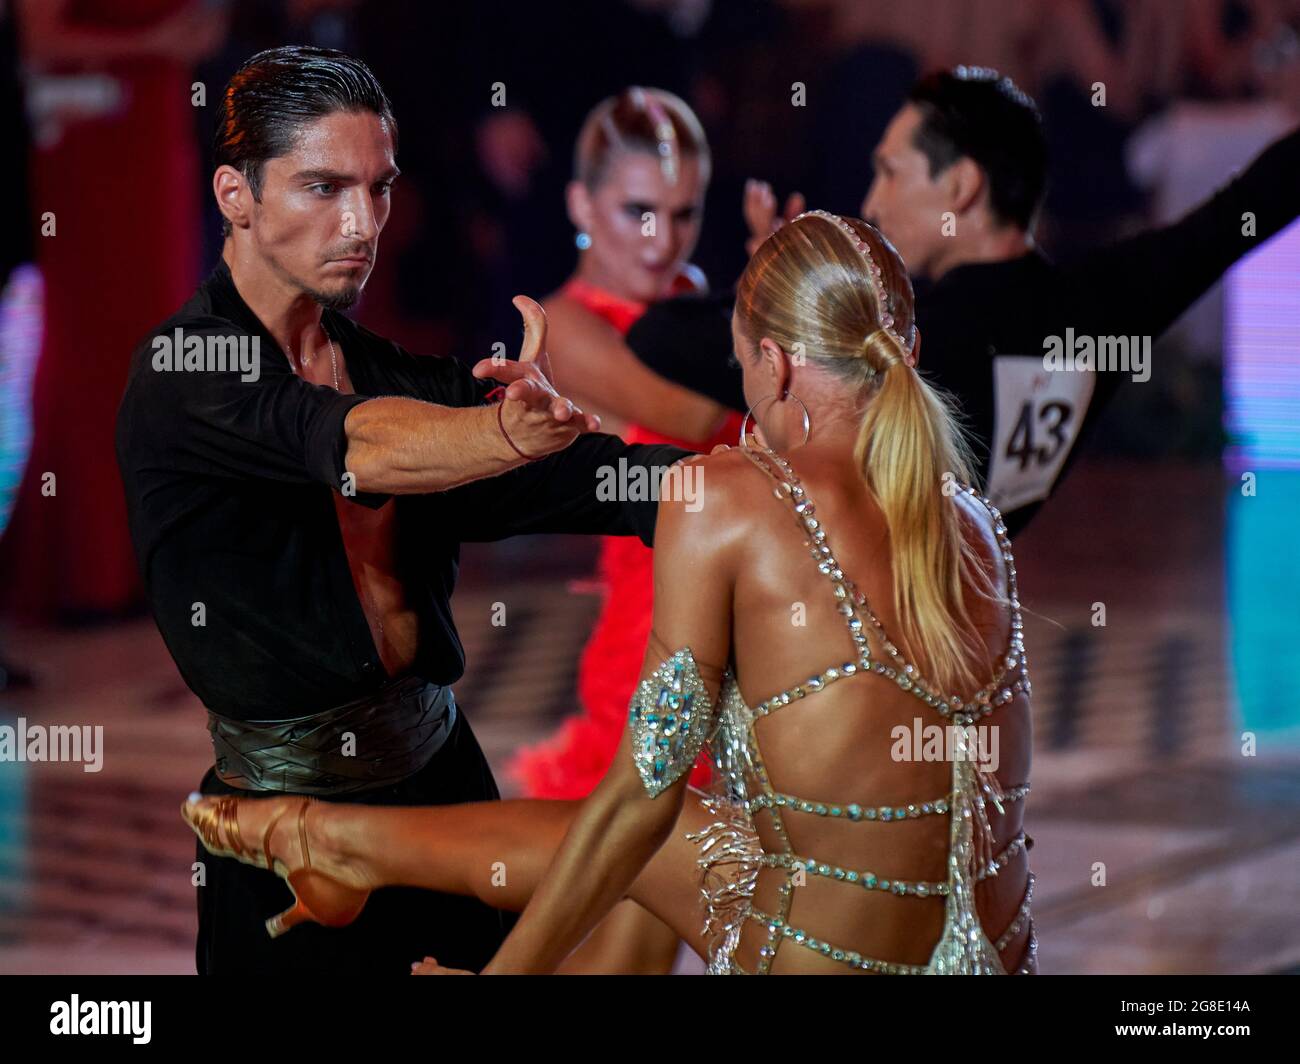 Moscow, Russia. 17th July, 2021. An incredible paso doble performance during the 2021 Latin America Dance World Cup among professionals and amateurs in Moscow. (Photo by Mihail Siergiejevicz/SOPA Images/Sipa USA) Credit: Sipa USA/Alamy Live News Stock Photo